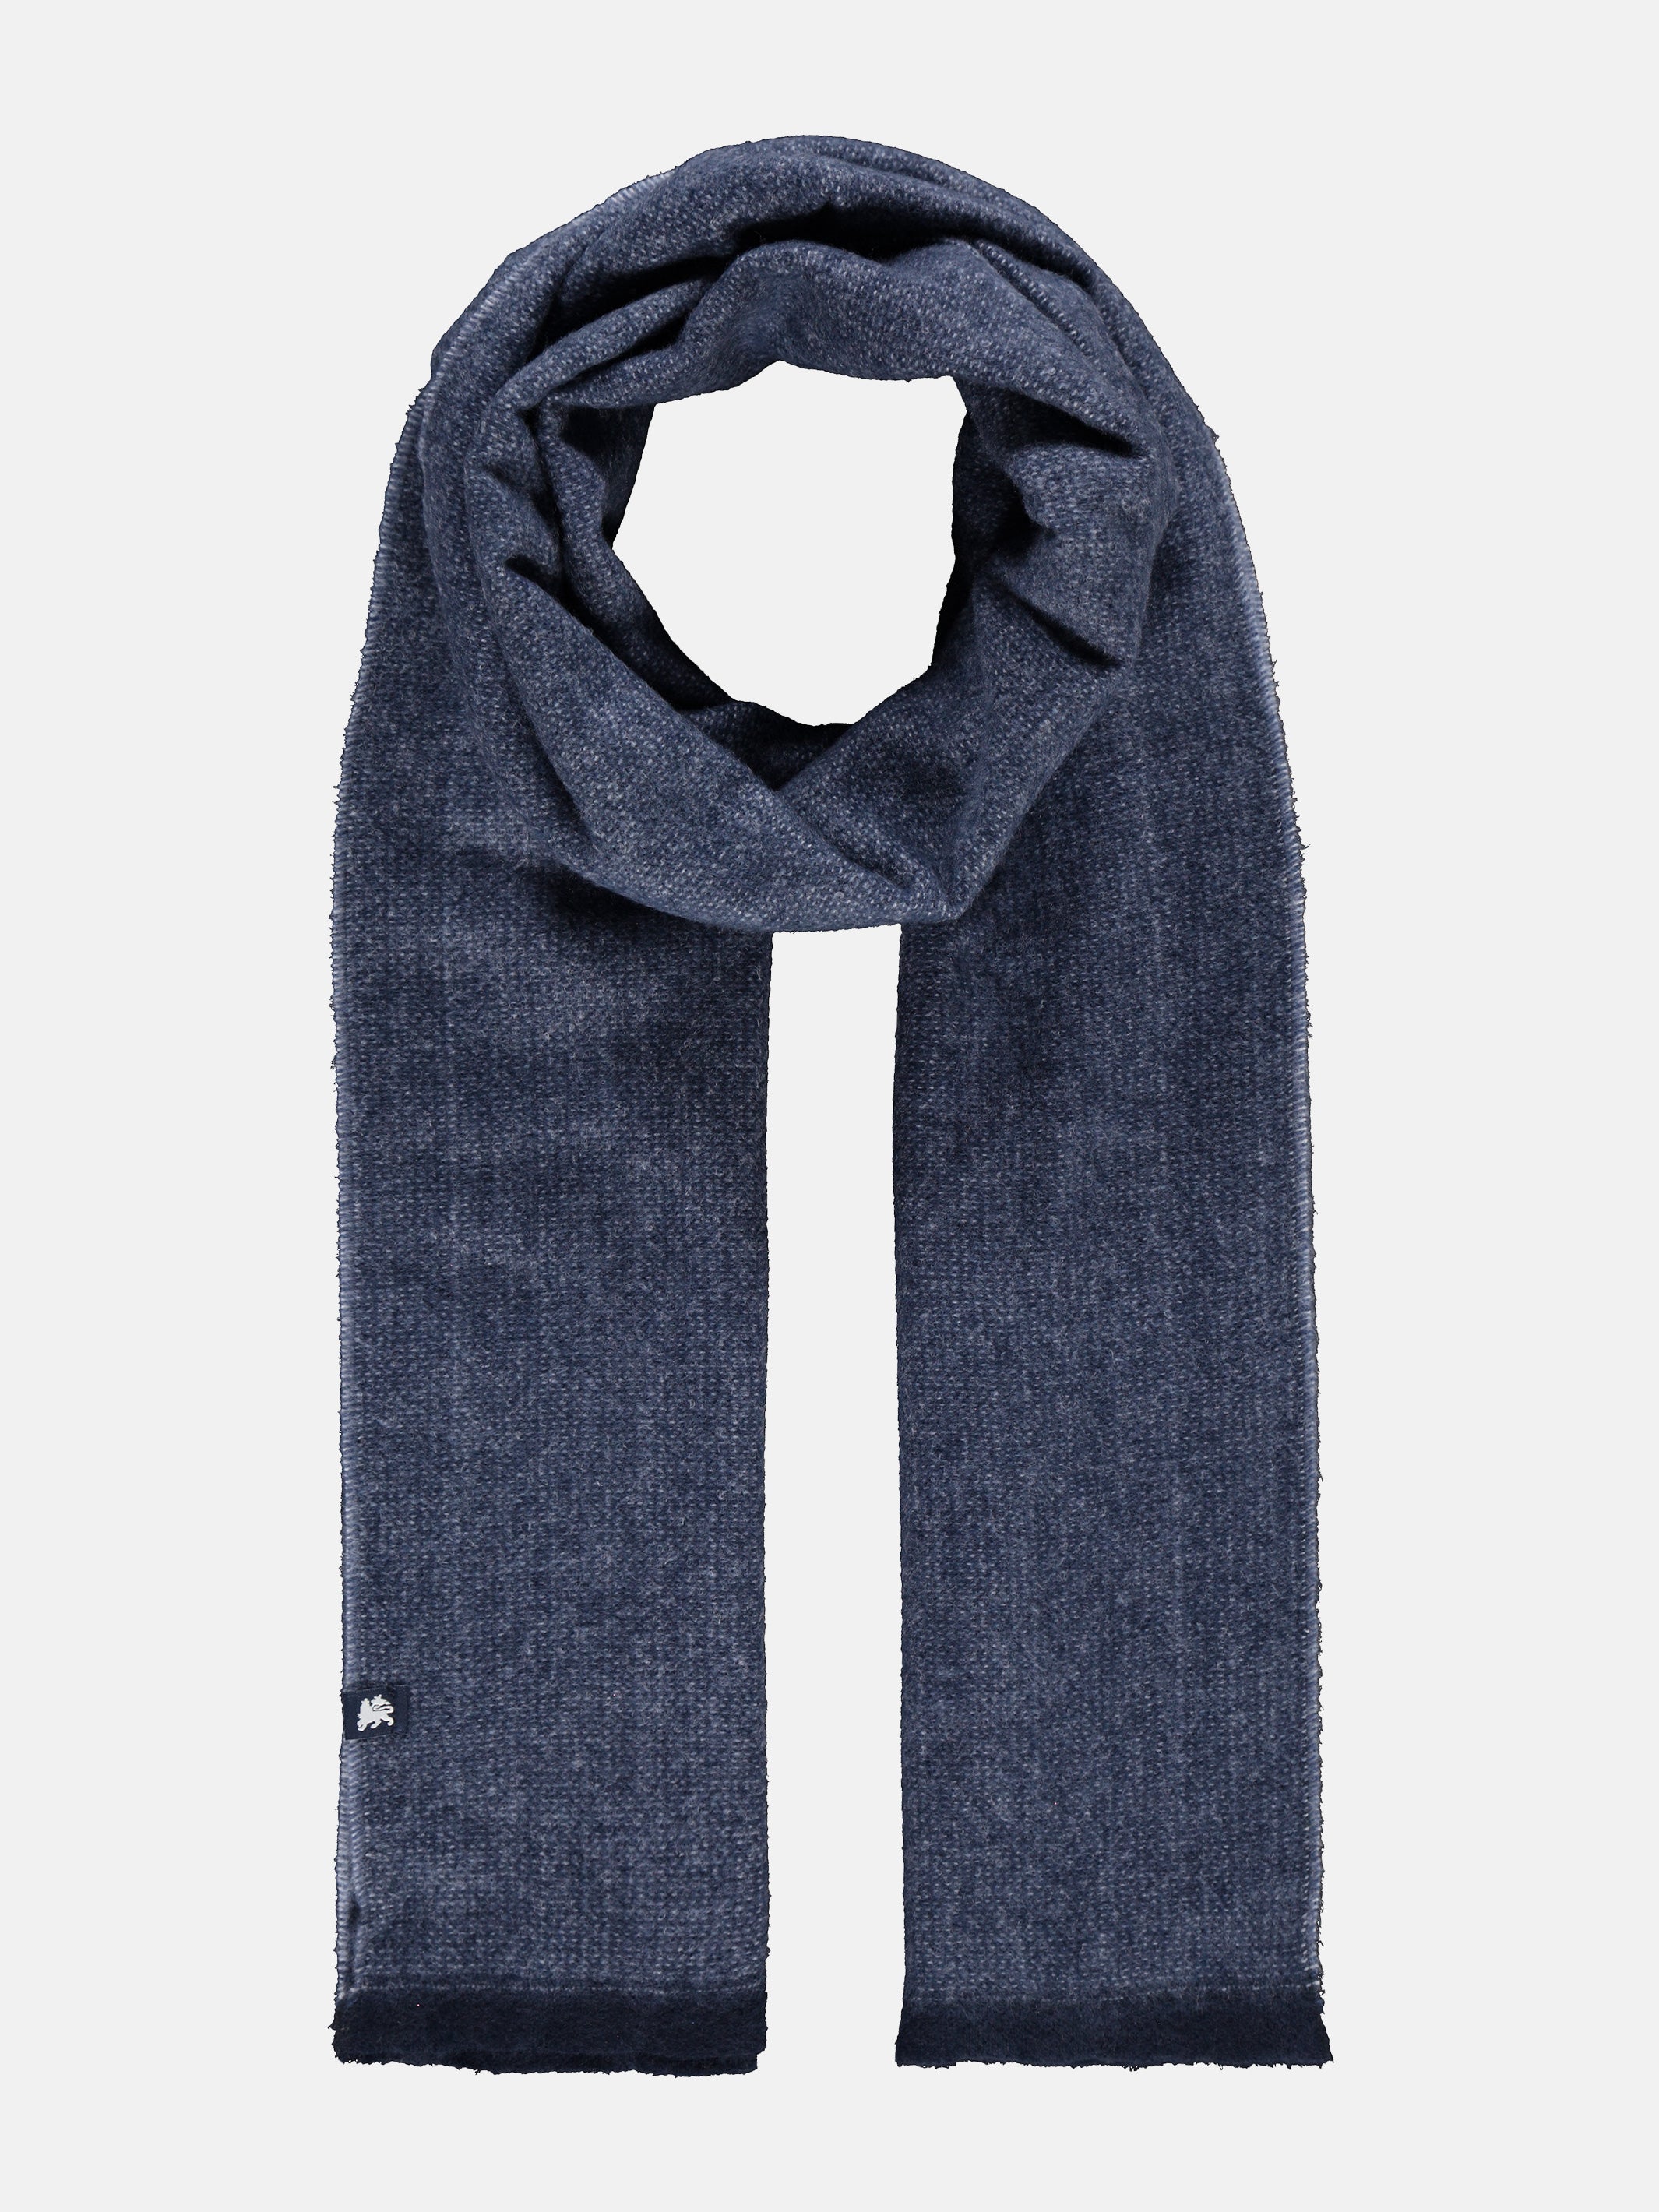 Woven scarf *Soft touch* – LERROS SHOP